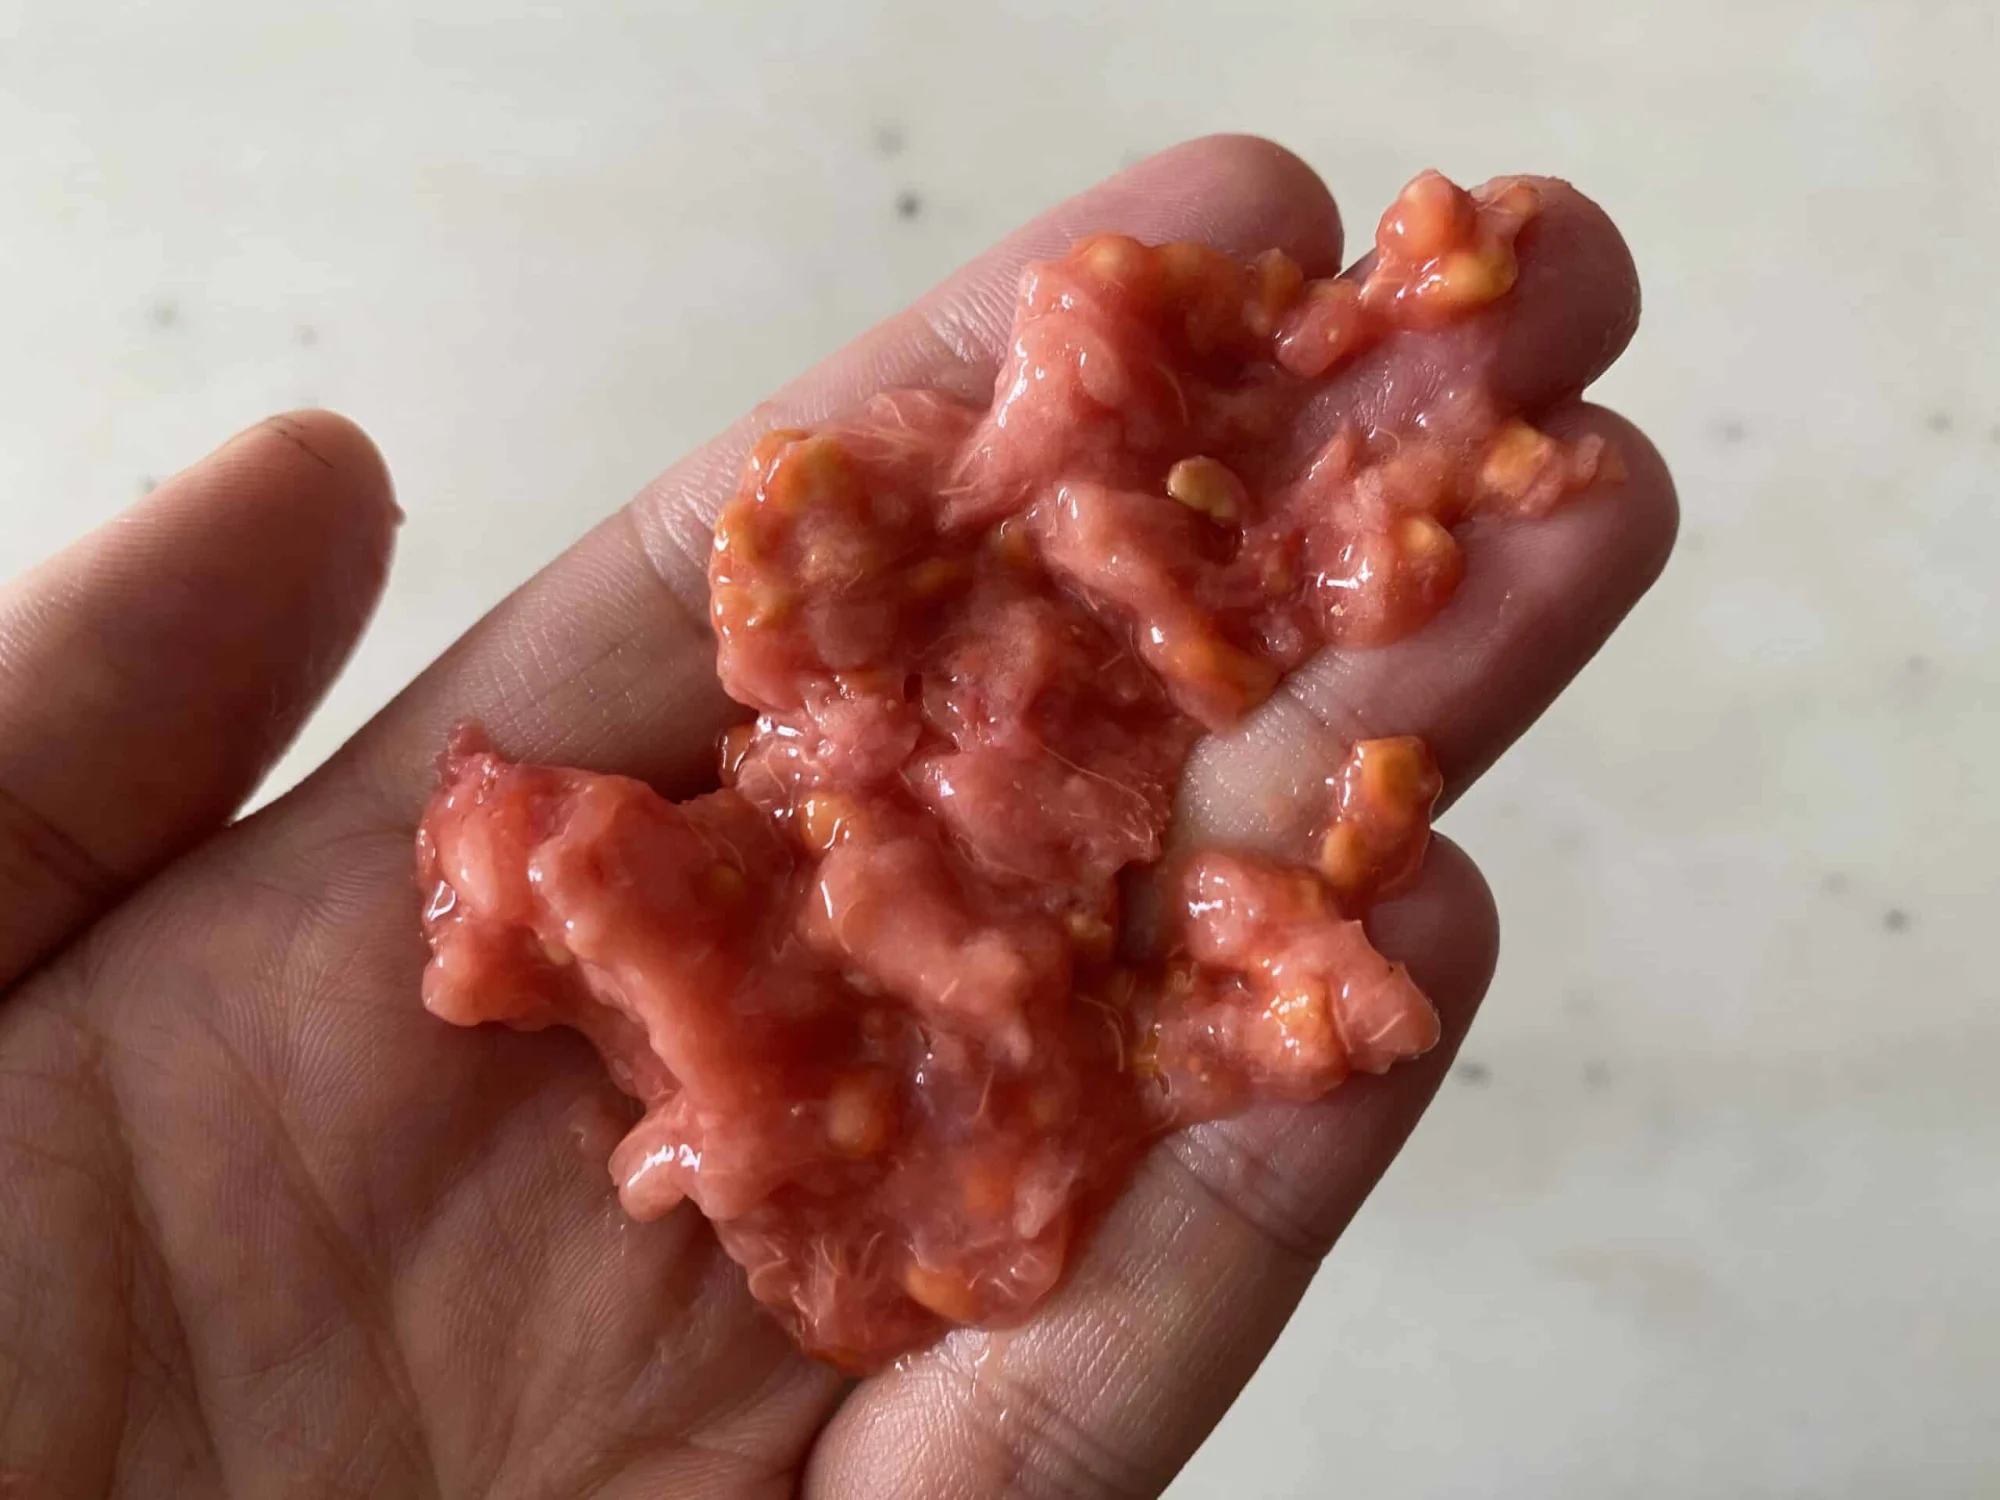 The mashed flesh of a pink guava with seeds.